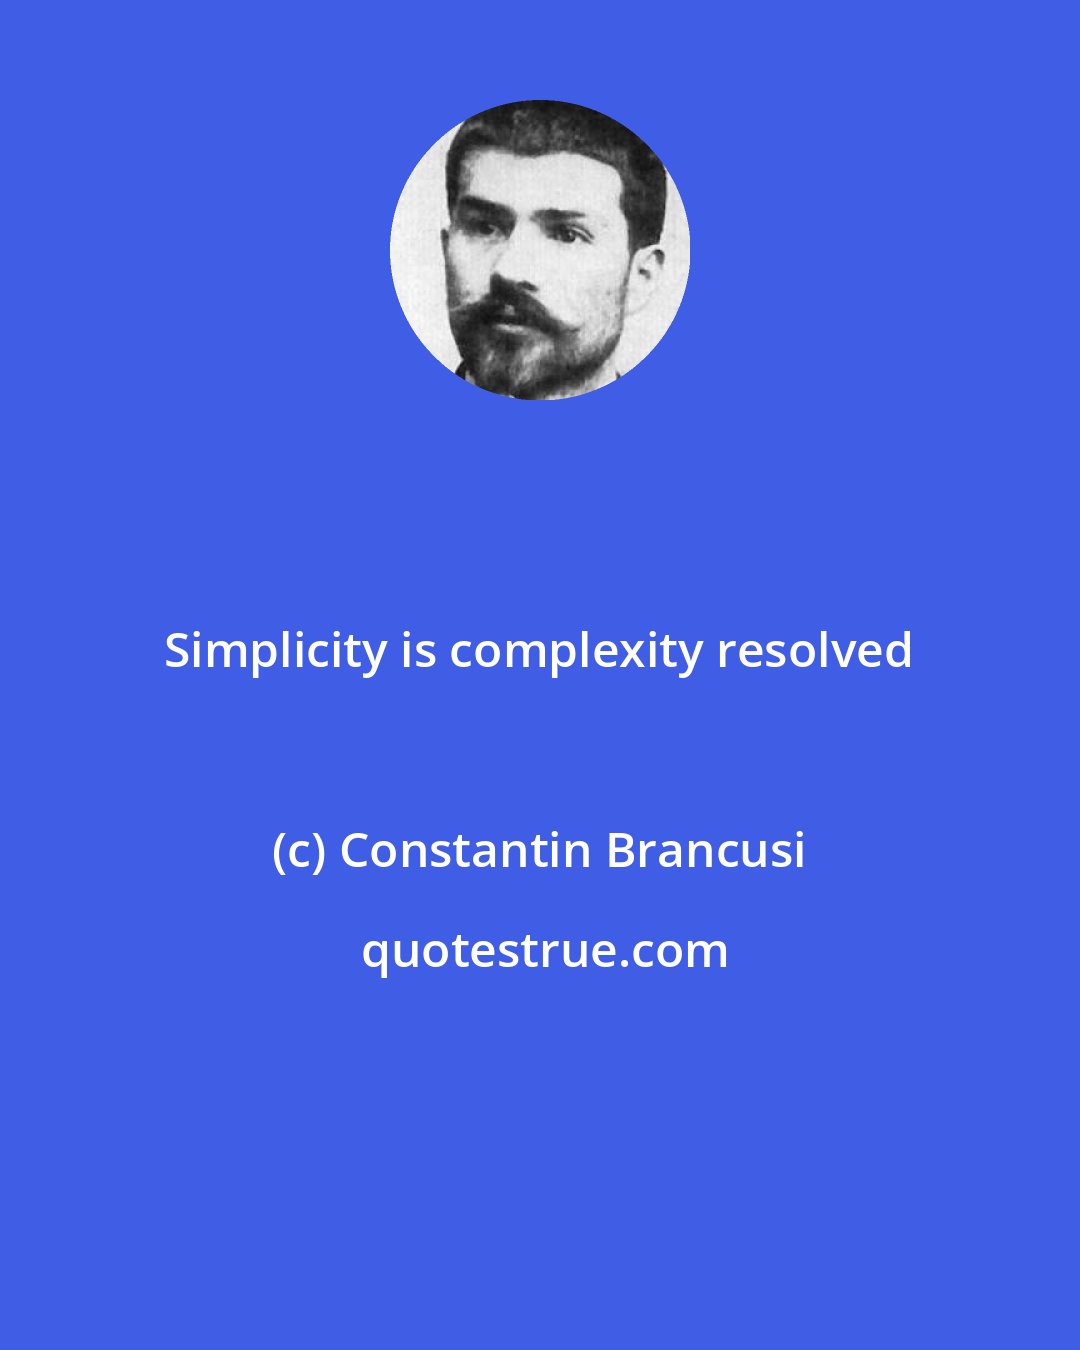 Constantin Brancusi: Simplicity is complexity resolved